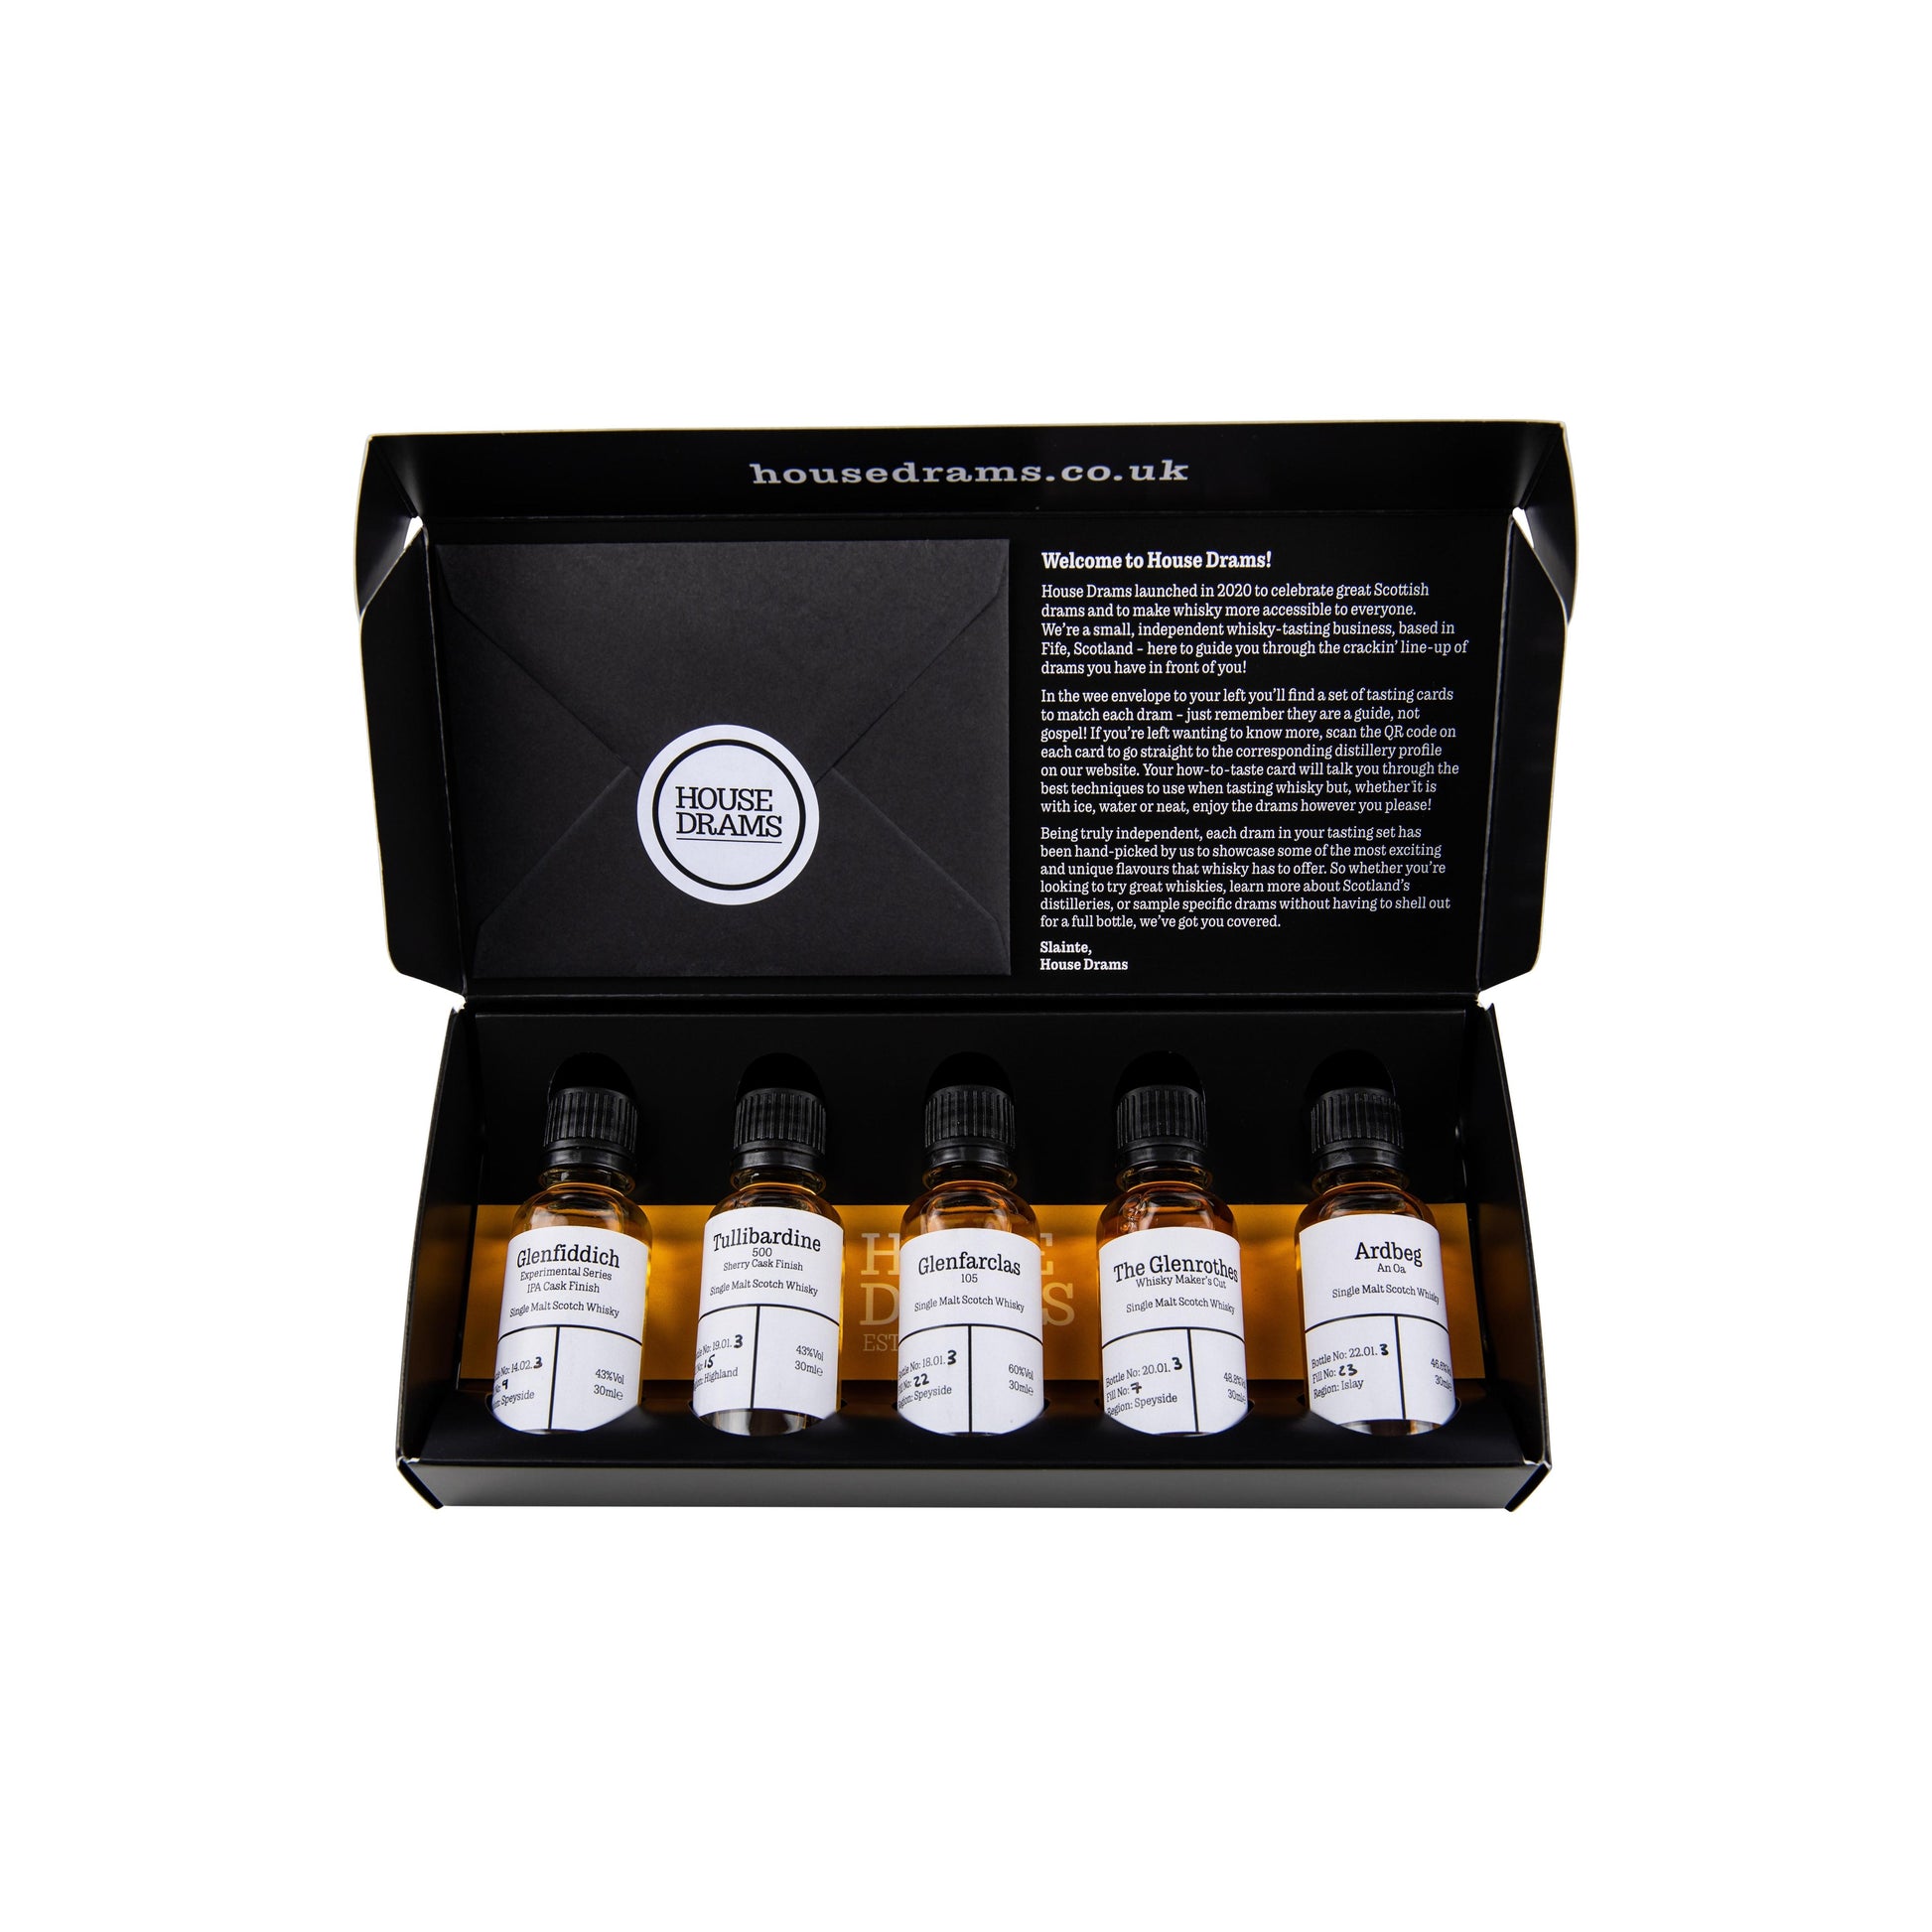 House Drams Whisky Tasting Set - 3 Years & A Day (5x30ml) - Single Malt Scotch Whisky-Single Malt Scotch Whisky-Fountainhall Wines